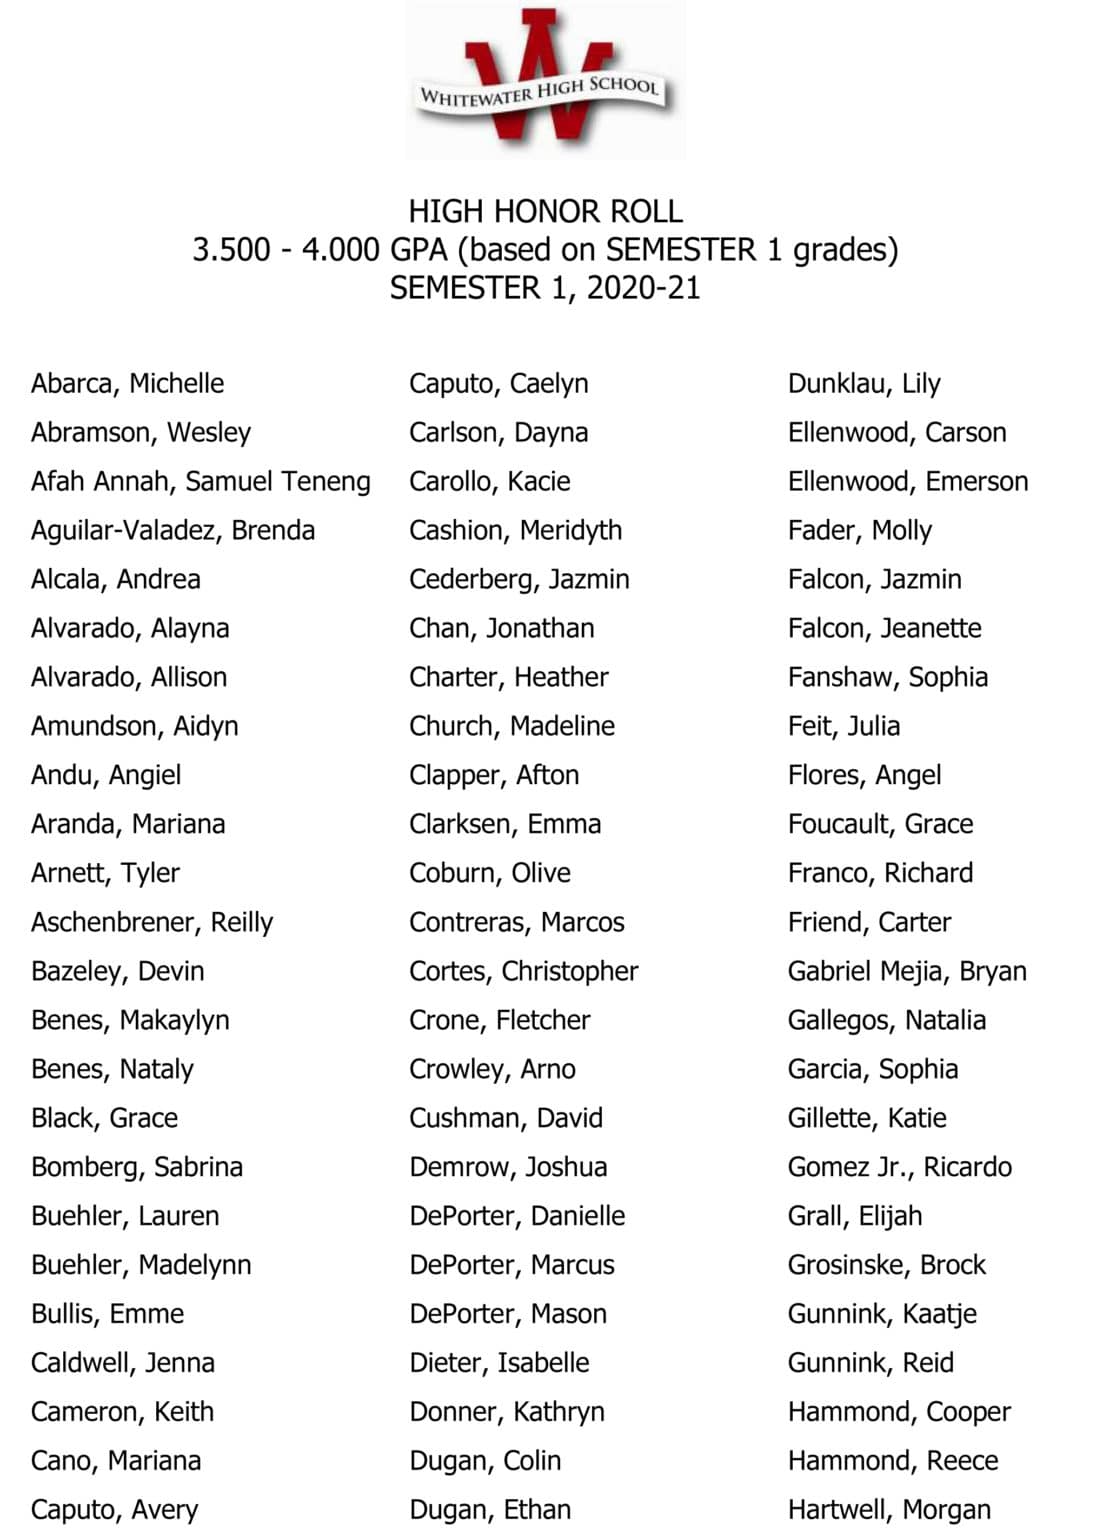 whs-announces-honor-roll-and-high-honor-roll-lists-for-the-first